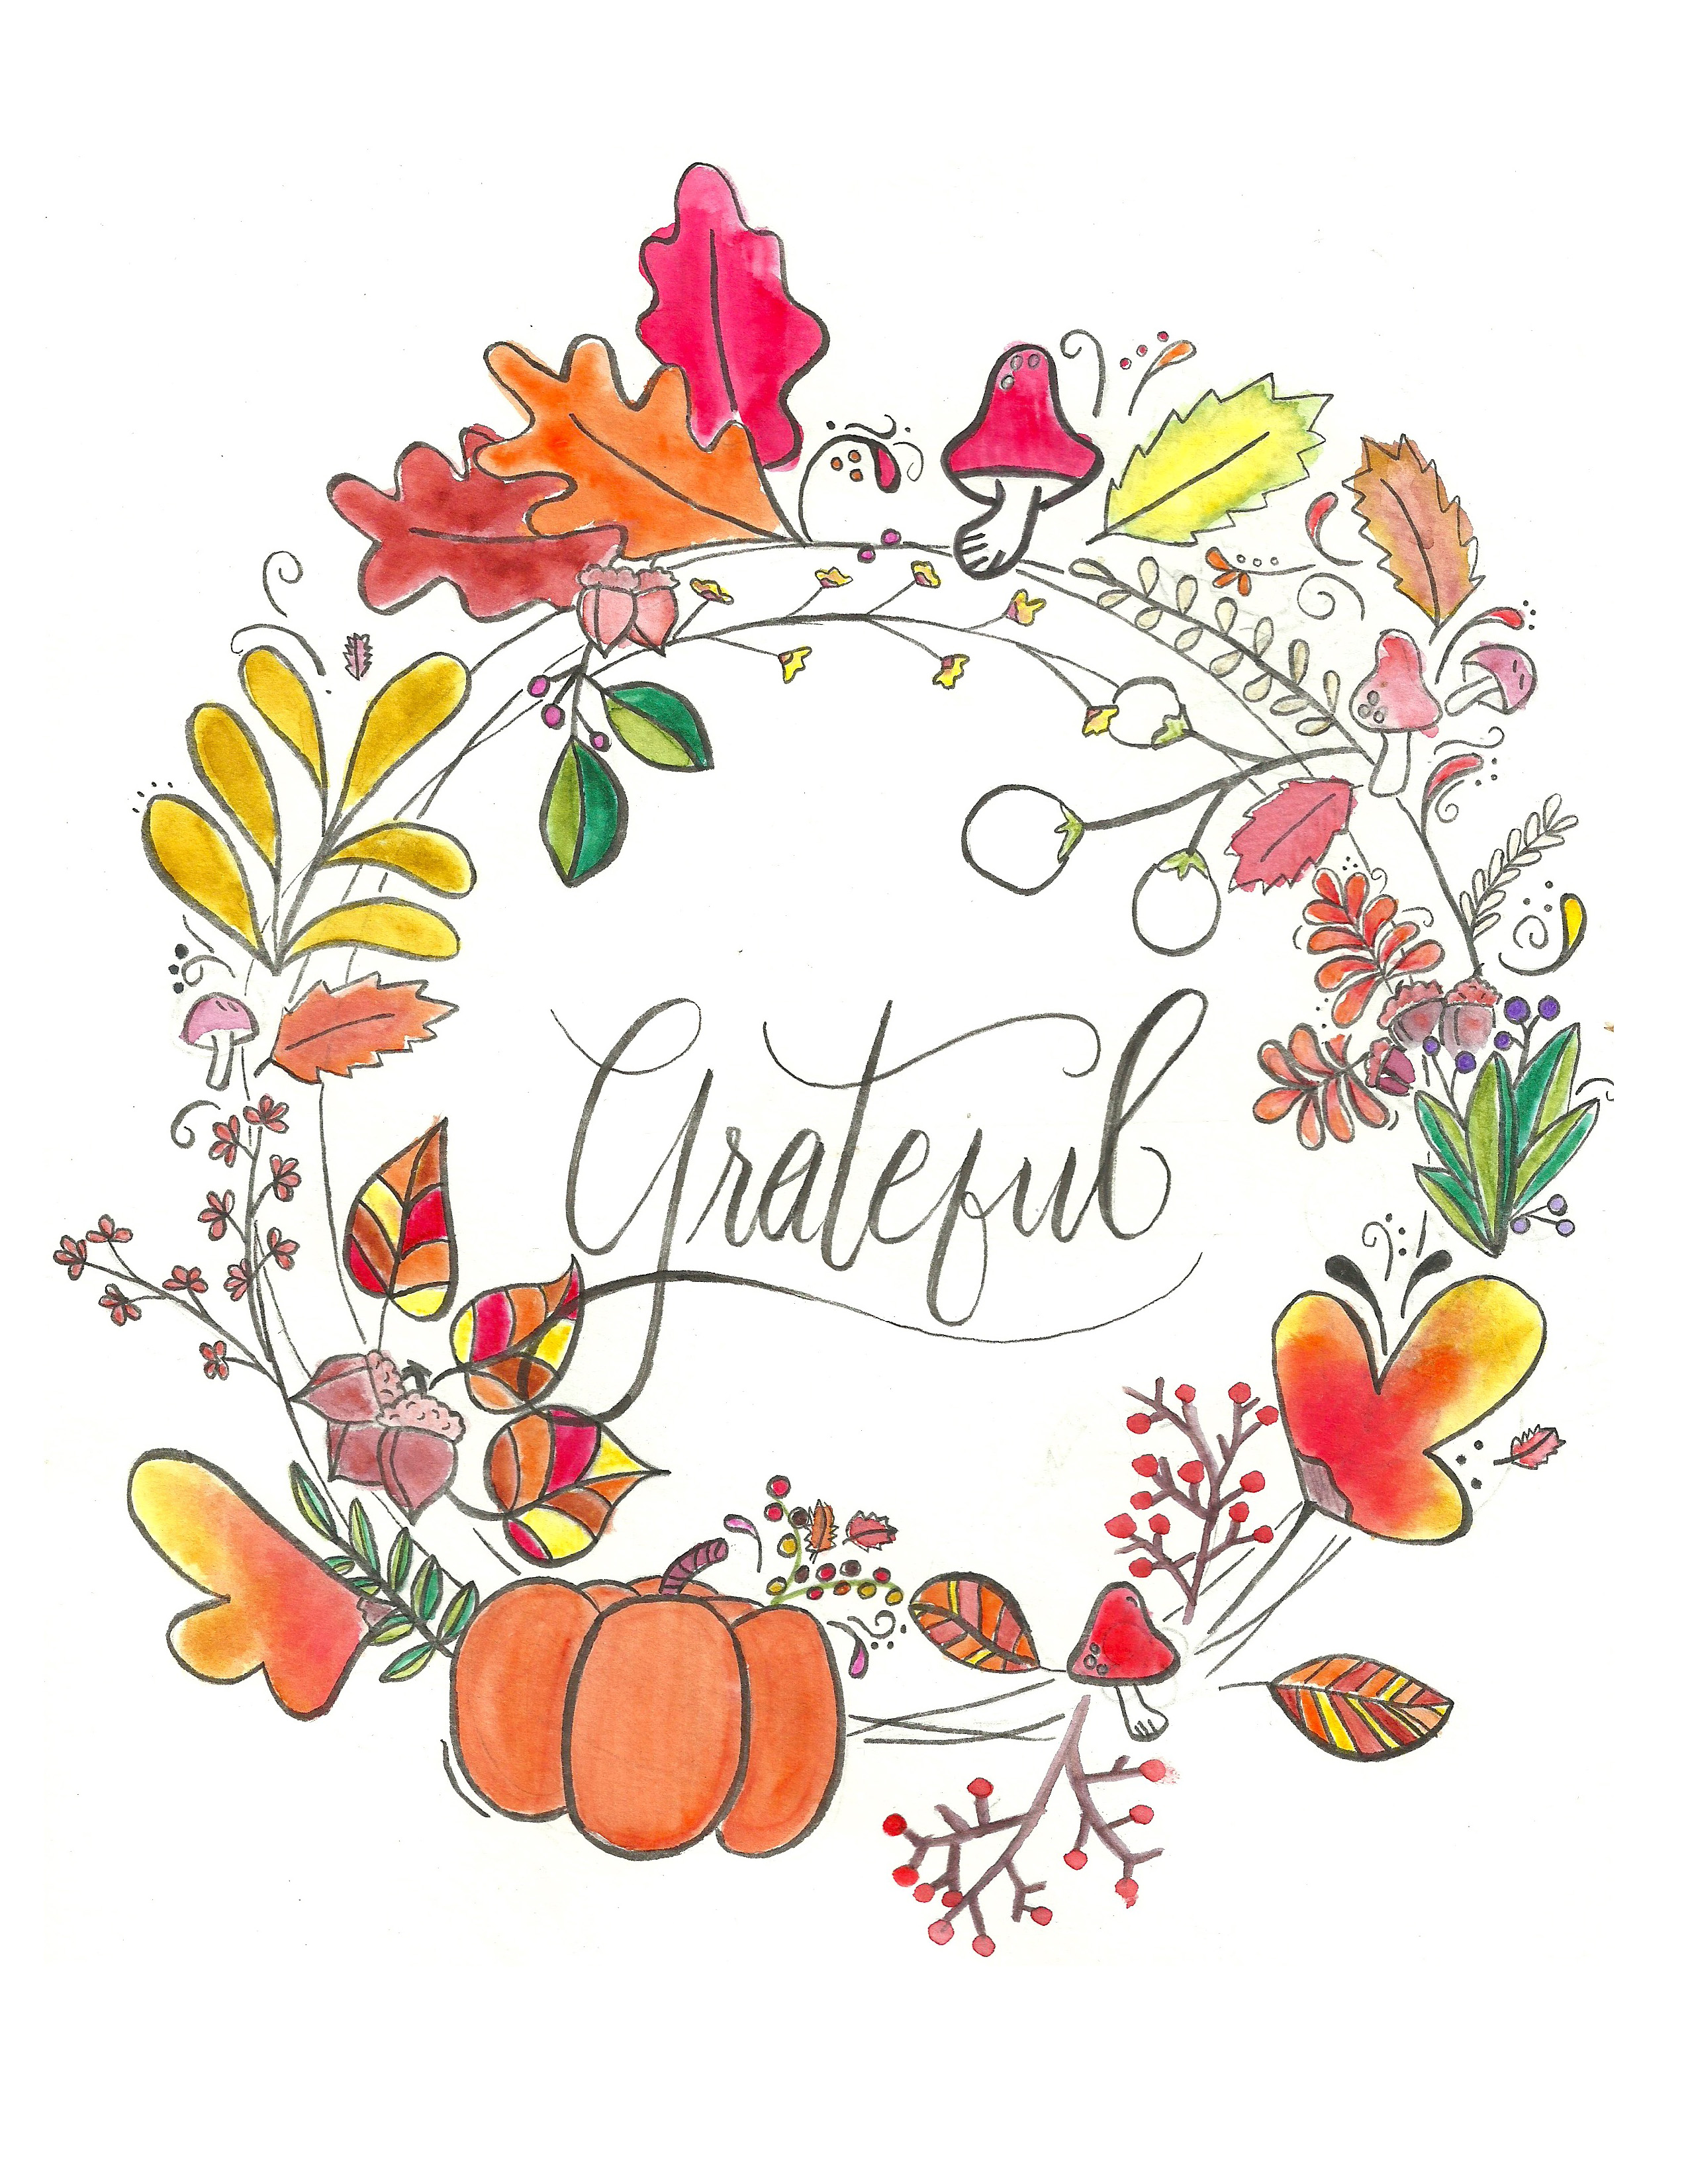 downloadable image of watercolor print of wreath with fall colors and the word grateful hand-lettered in the center on white background.